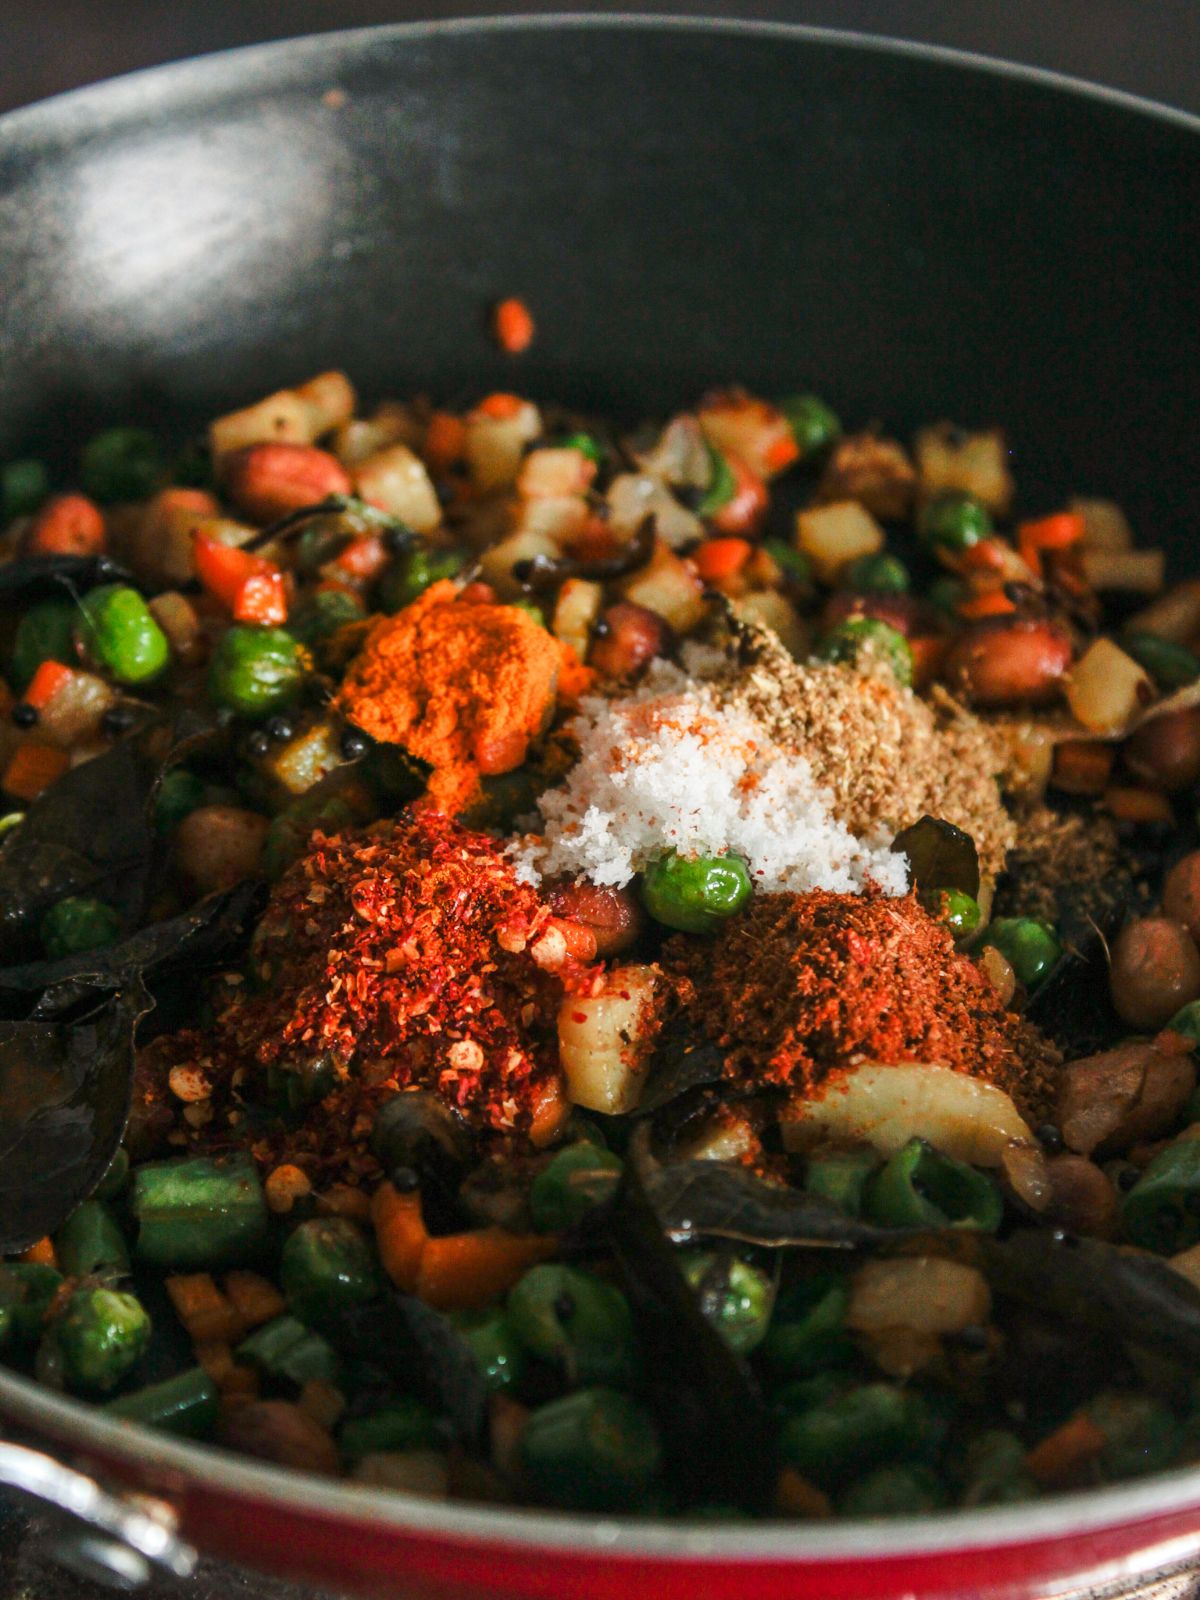 cooked vegetables in skillet topped with spices